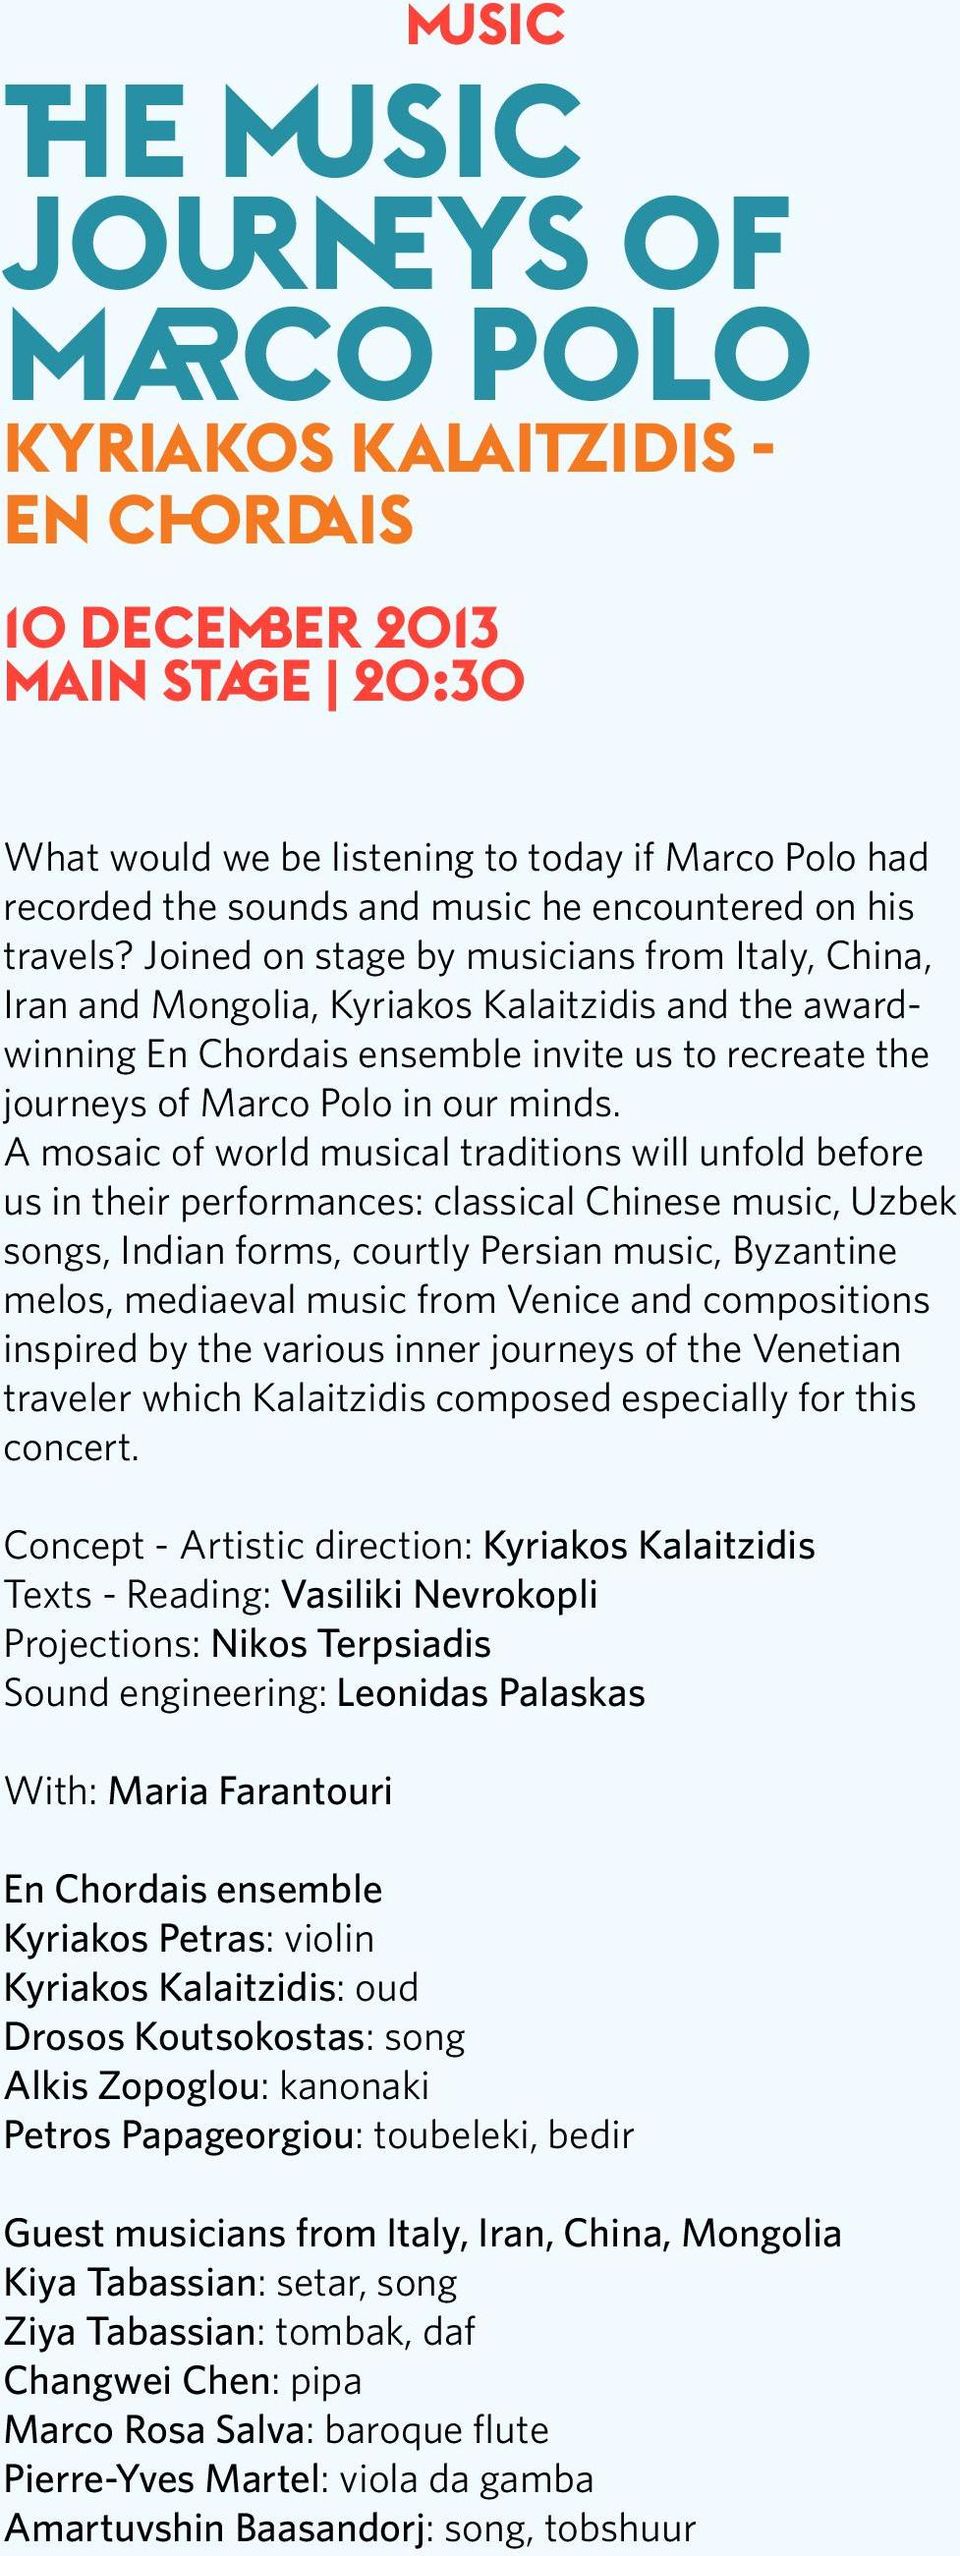 Joined on stage by musicians from Italy, China, Iran and Mongolia, Kyriakos Kalaitzidis and the awardwinning En Chordais ensemble invite us to recreate the journeys of Marco Polo in our minds.